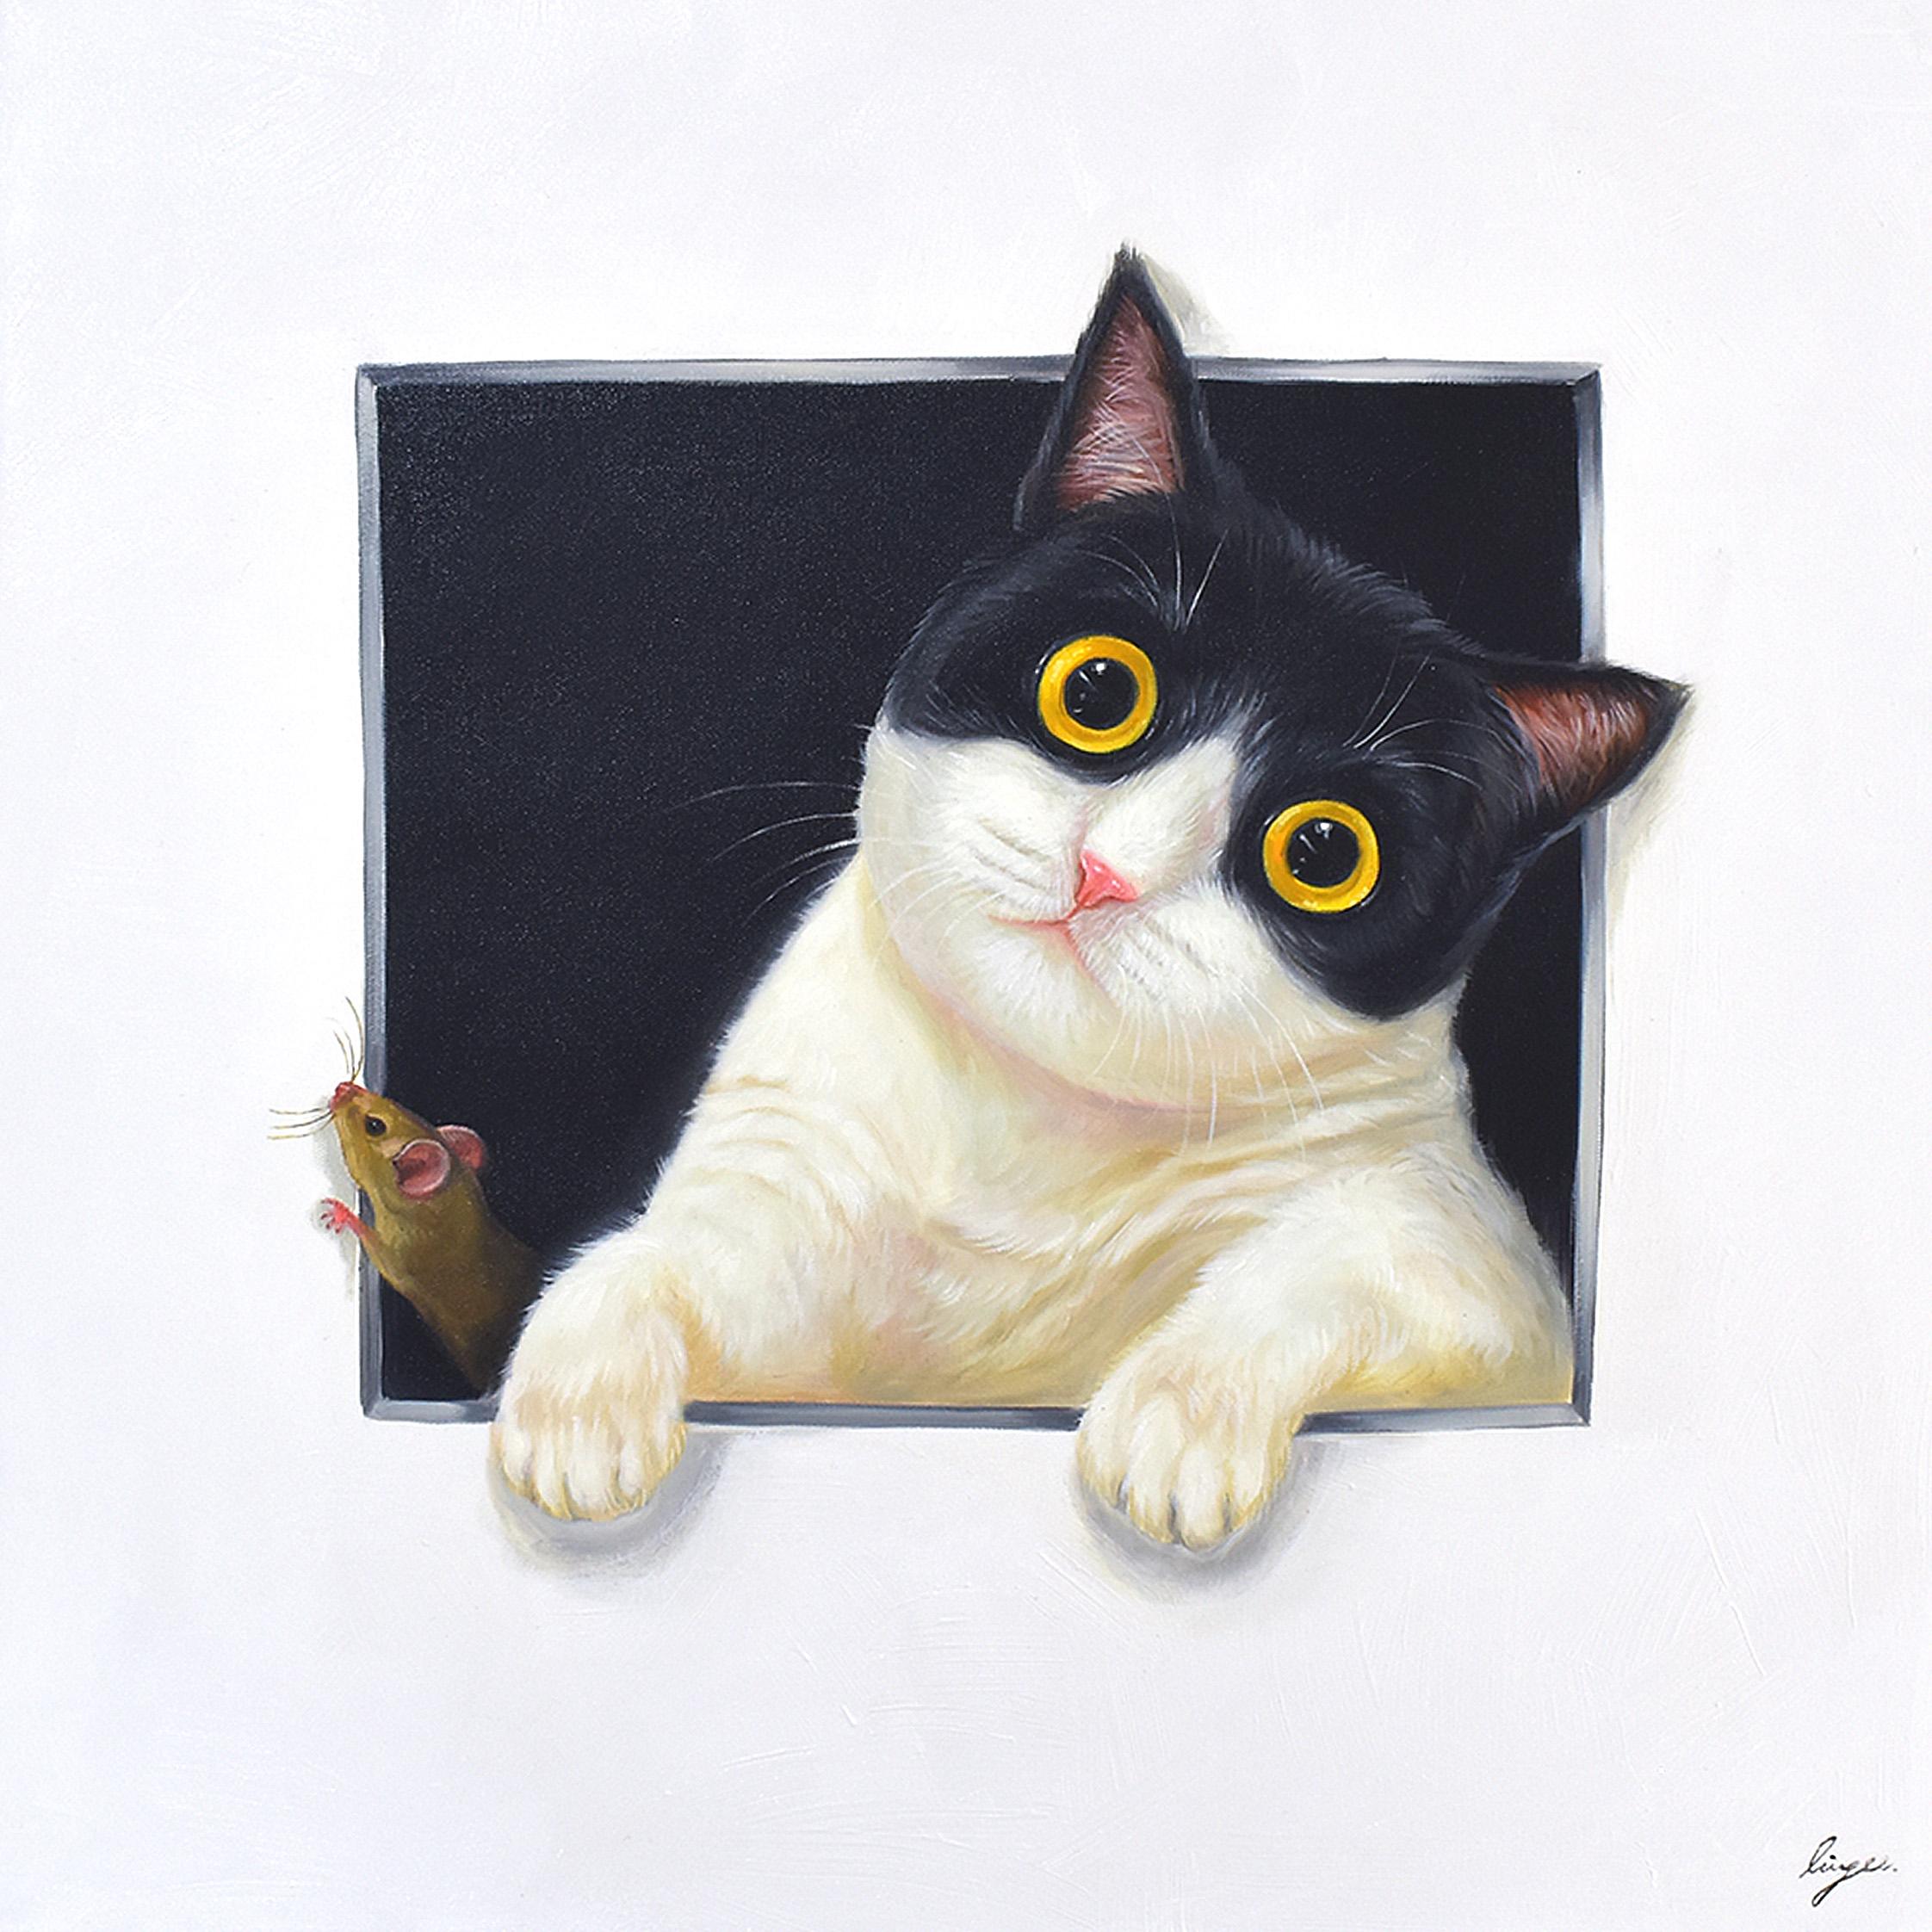 Lingee Bangkhuntod Animal Painting - Playmate 2. Cat and Mouse looking Through a Hole. Adorable Cat and Mouse. Animal